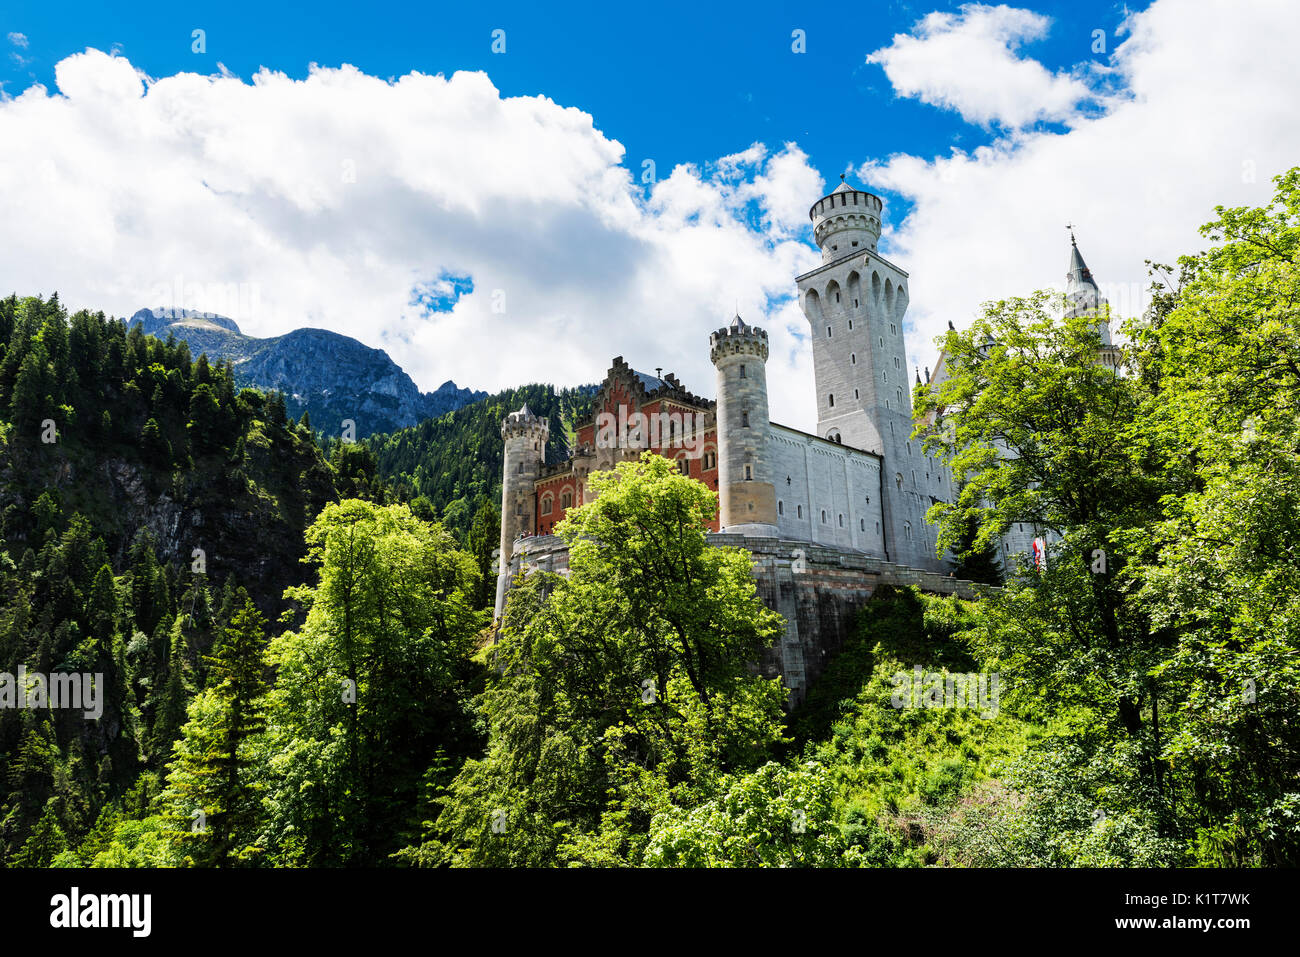 Neuschwanstein Castle is a very famous castle position on a hill above the German town of Hohenschwangau near Fussen in the bavarian area of Germany Stock Photo